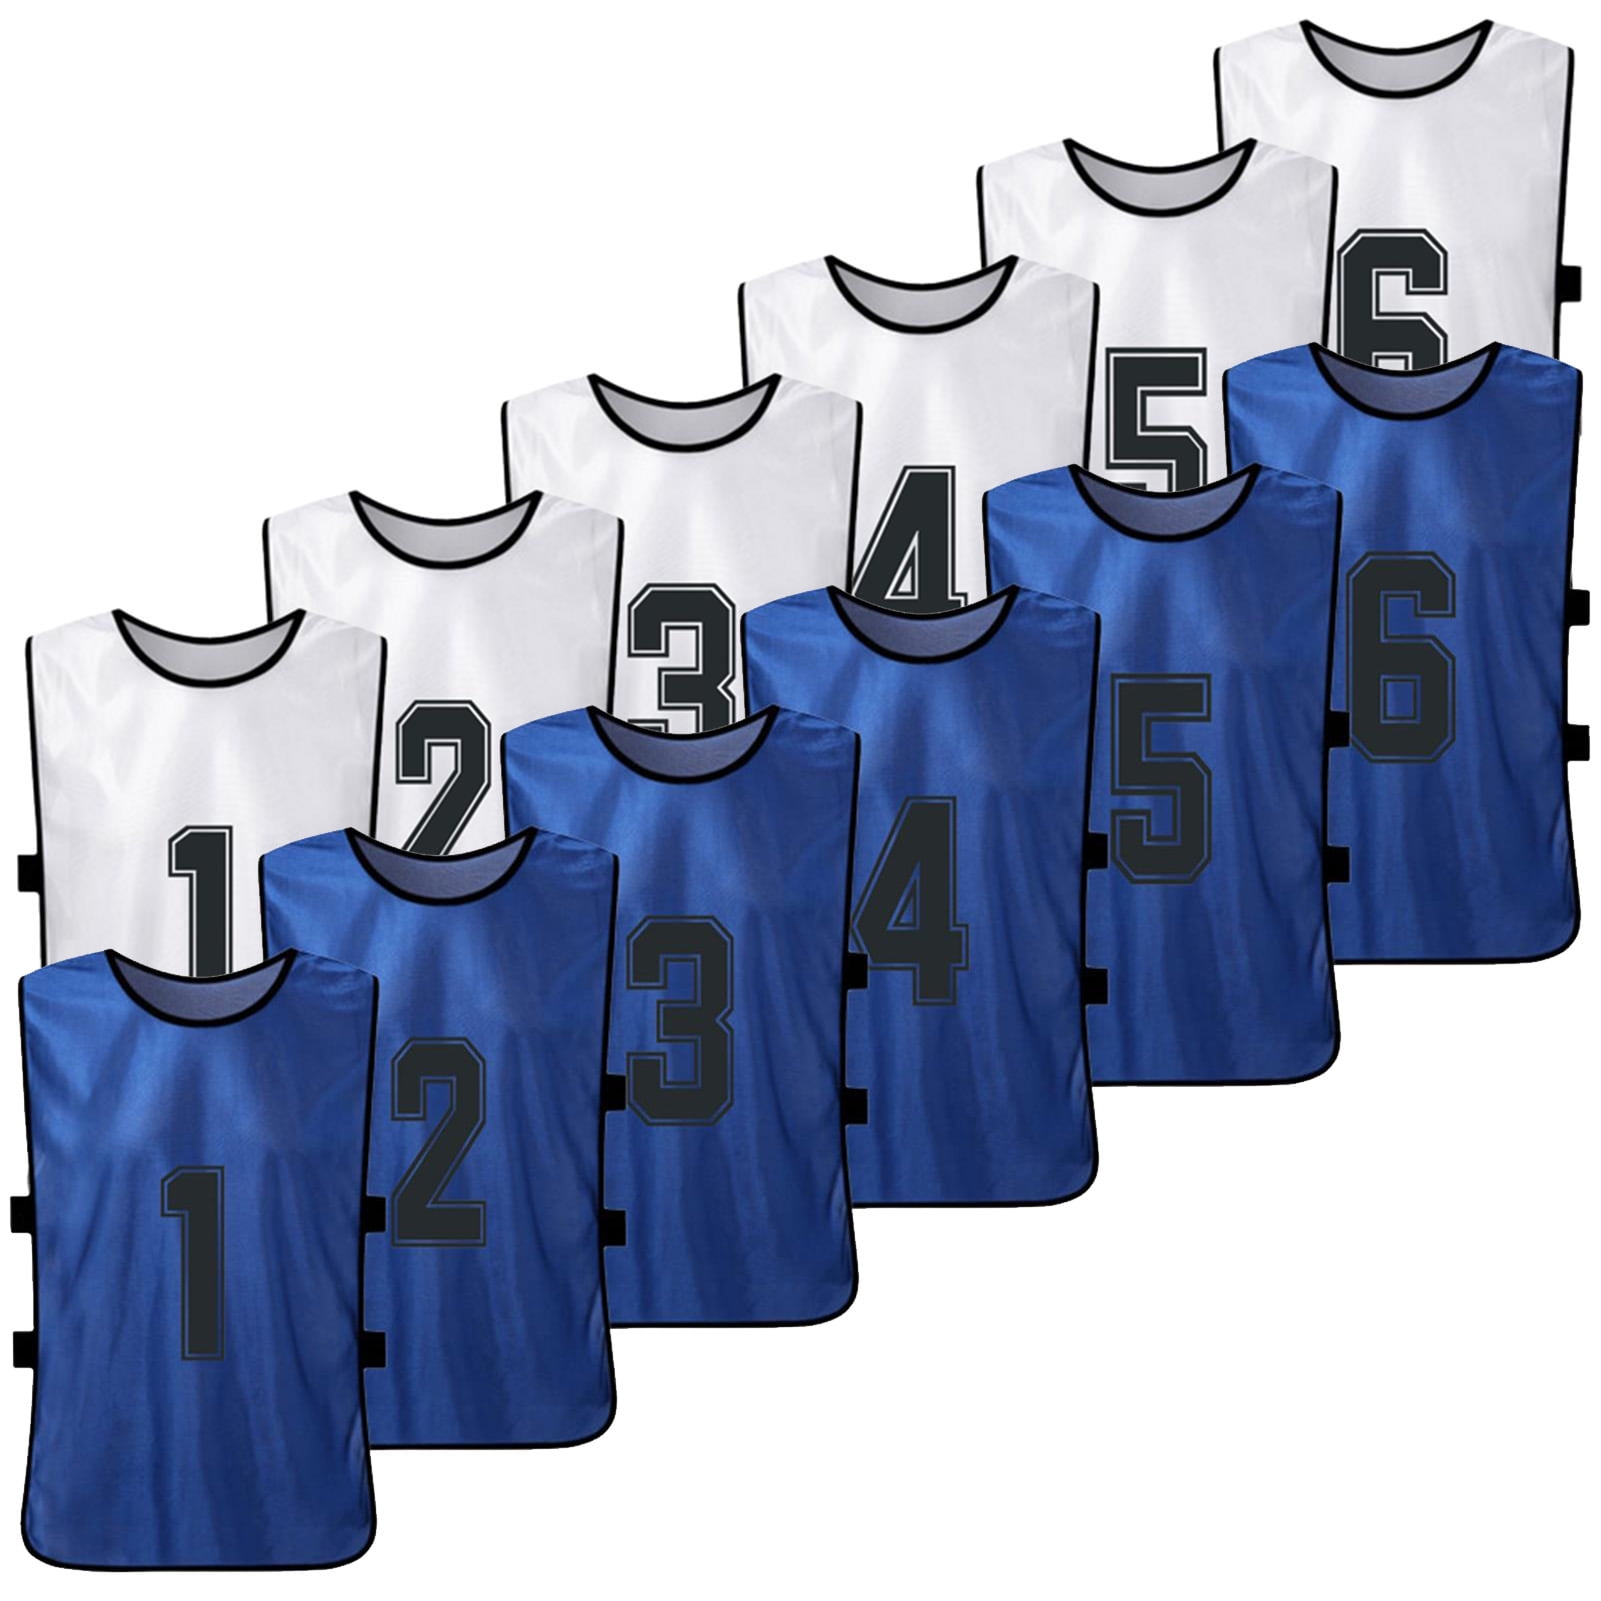 Adult Light Blue Scrimmage Training Vests Pinnie Uniform for Sports 